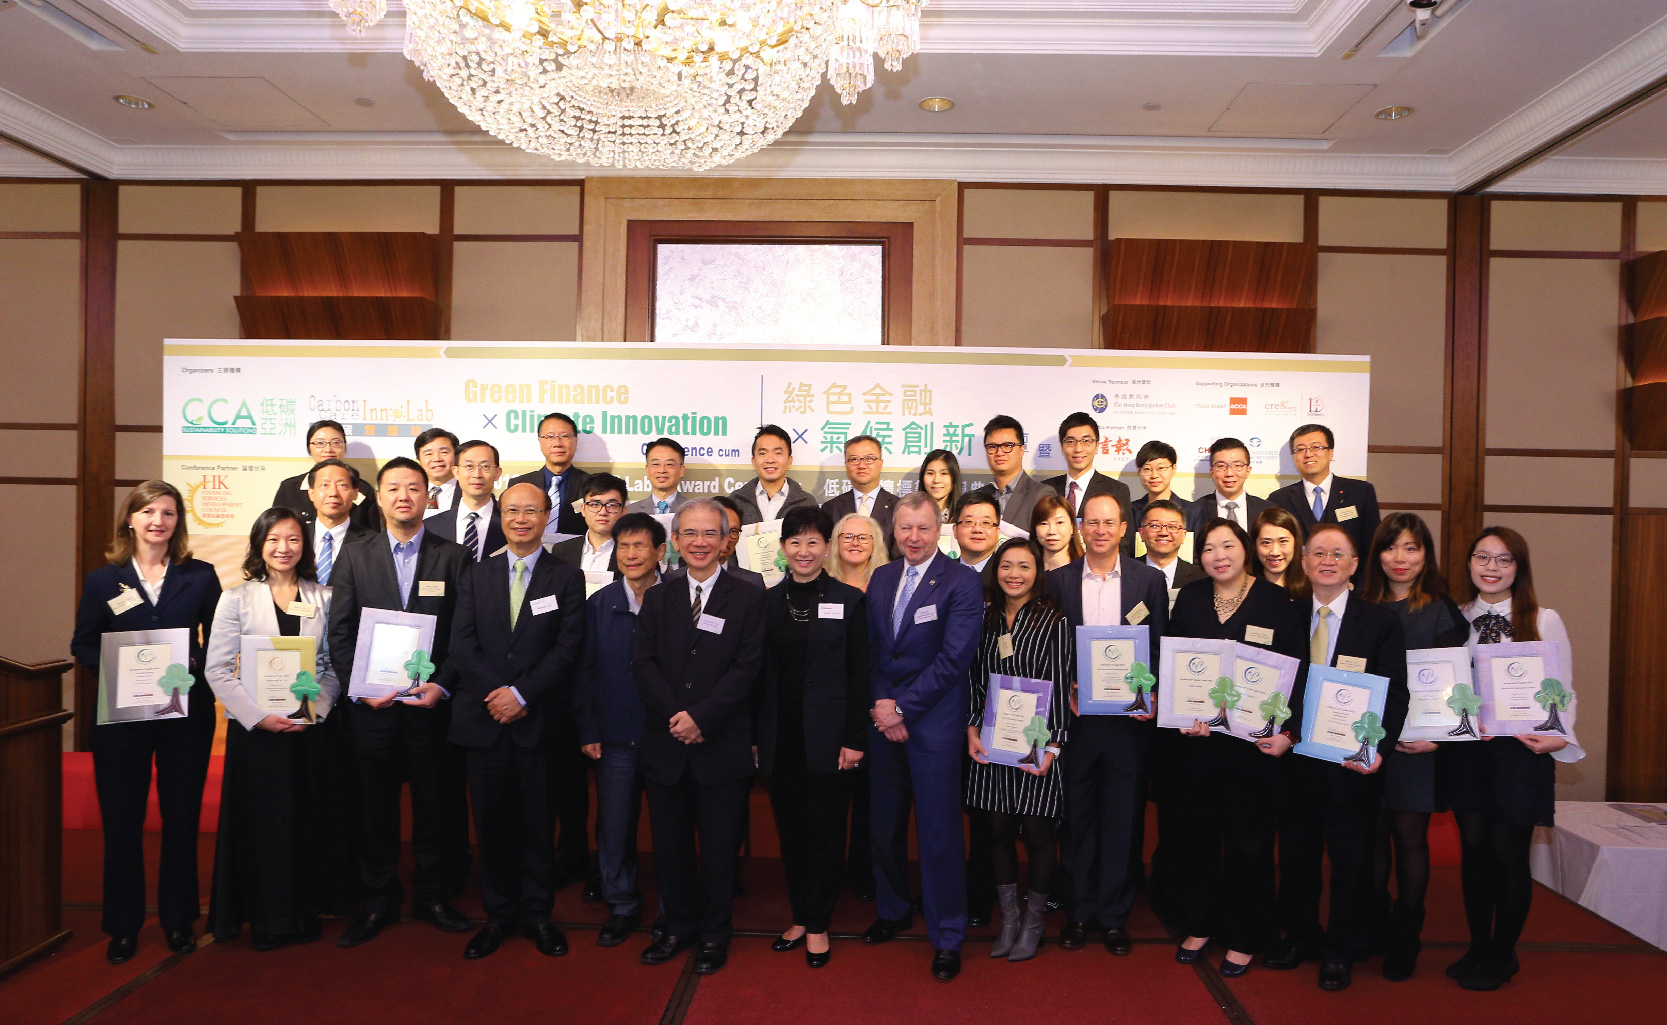 Cover Image for “Green Finance x Climate Innovation” Conference cum 2016 CarbonCare® Label Award Ceremony